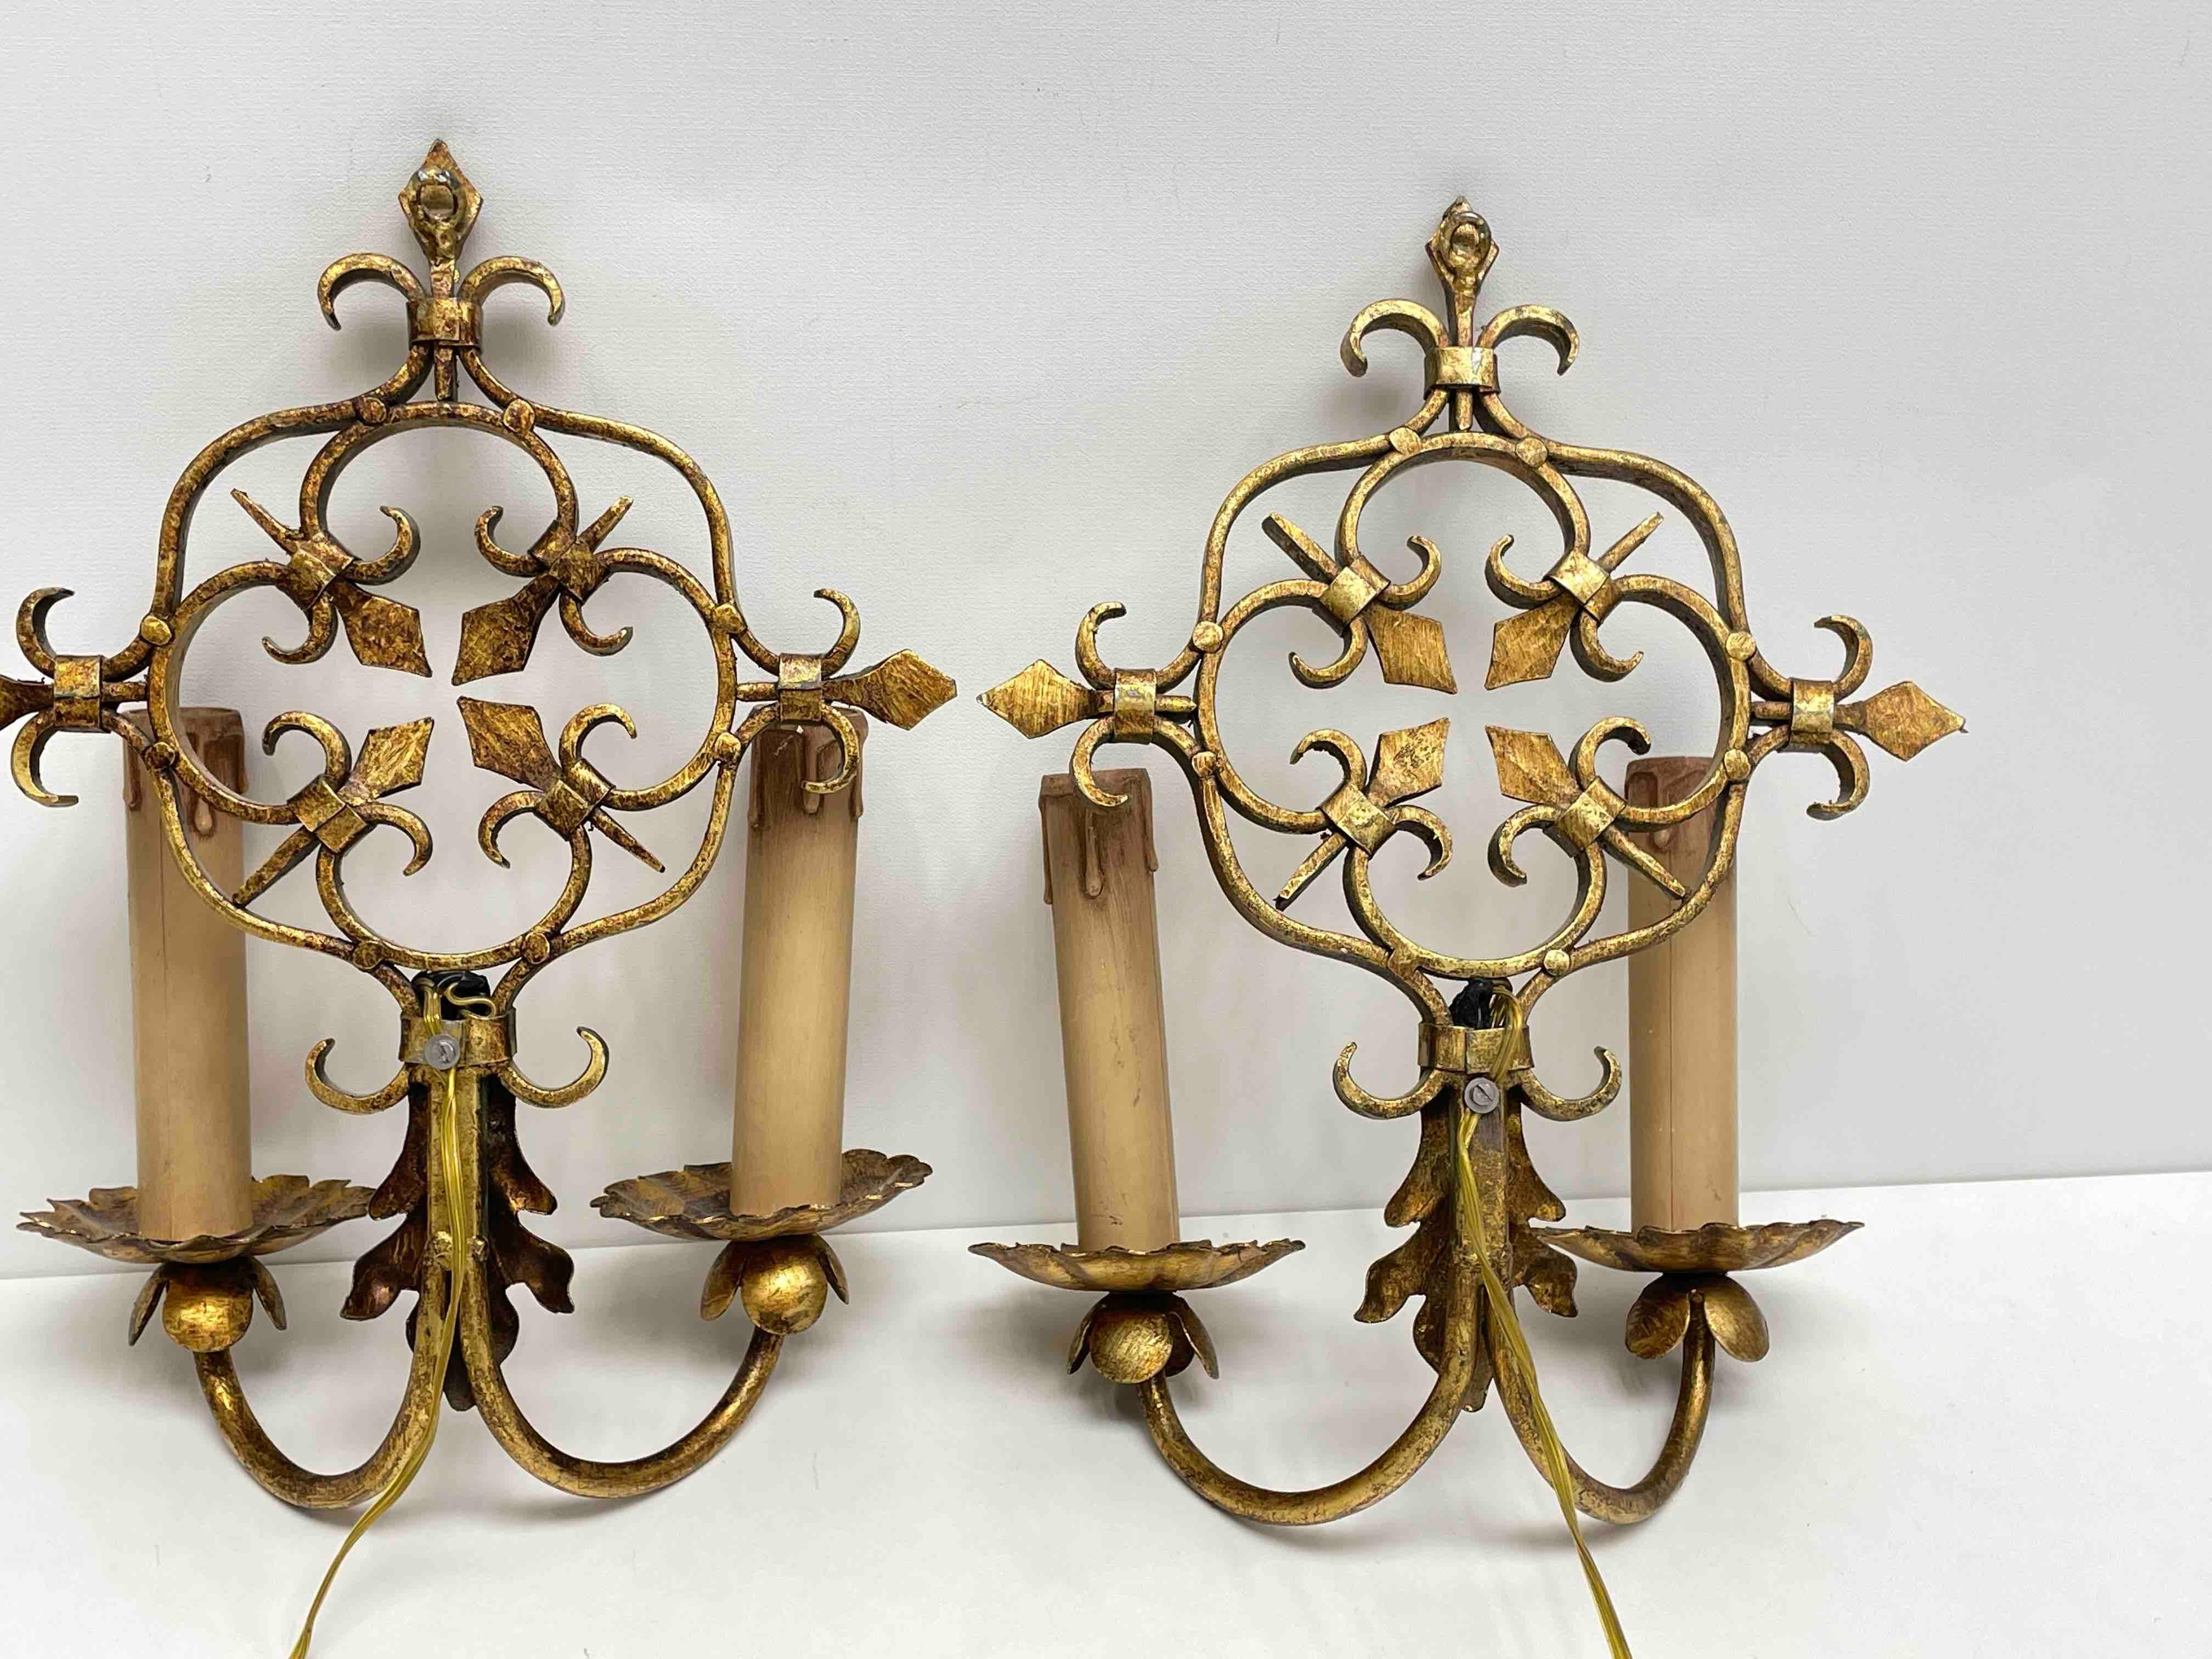 Pair of Gilt Metal Tole Toleware Sconces by Banci Firenze, Italy, 1960s For Sale 4